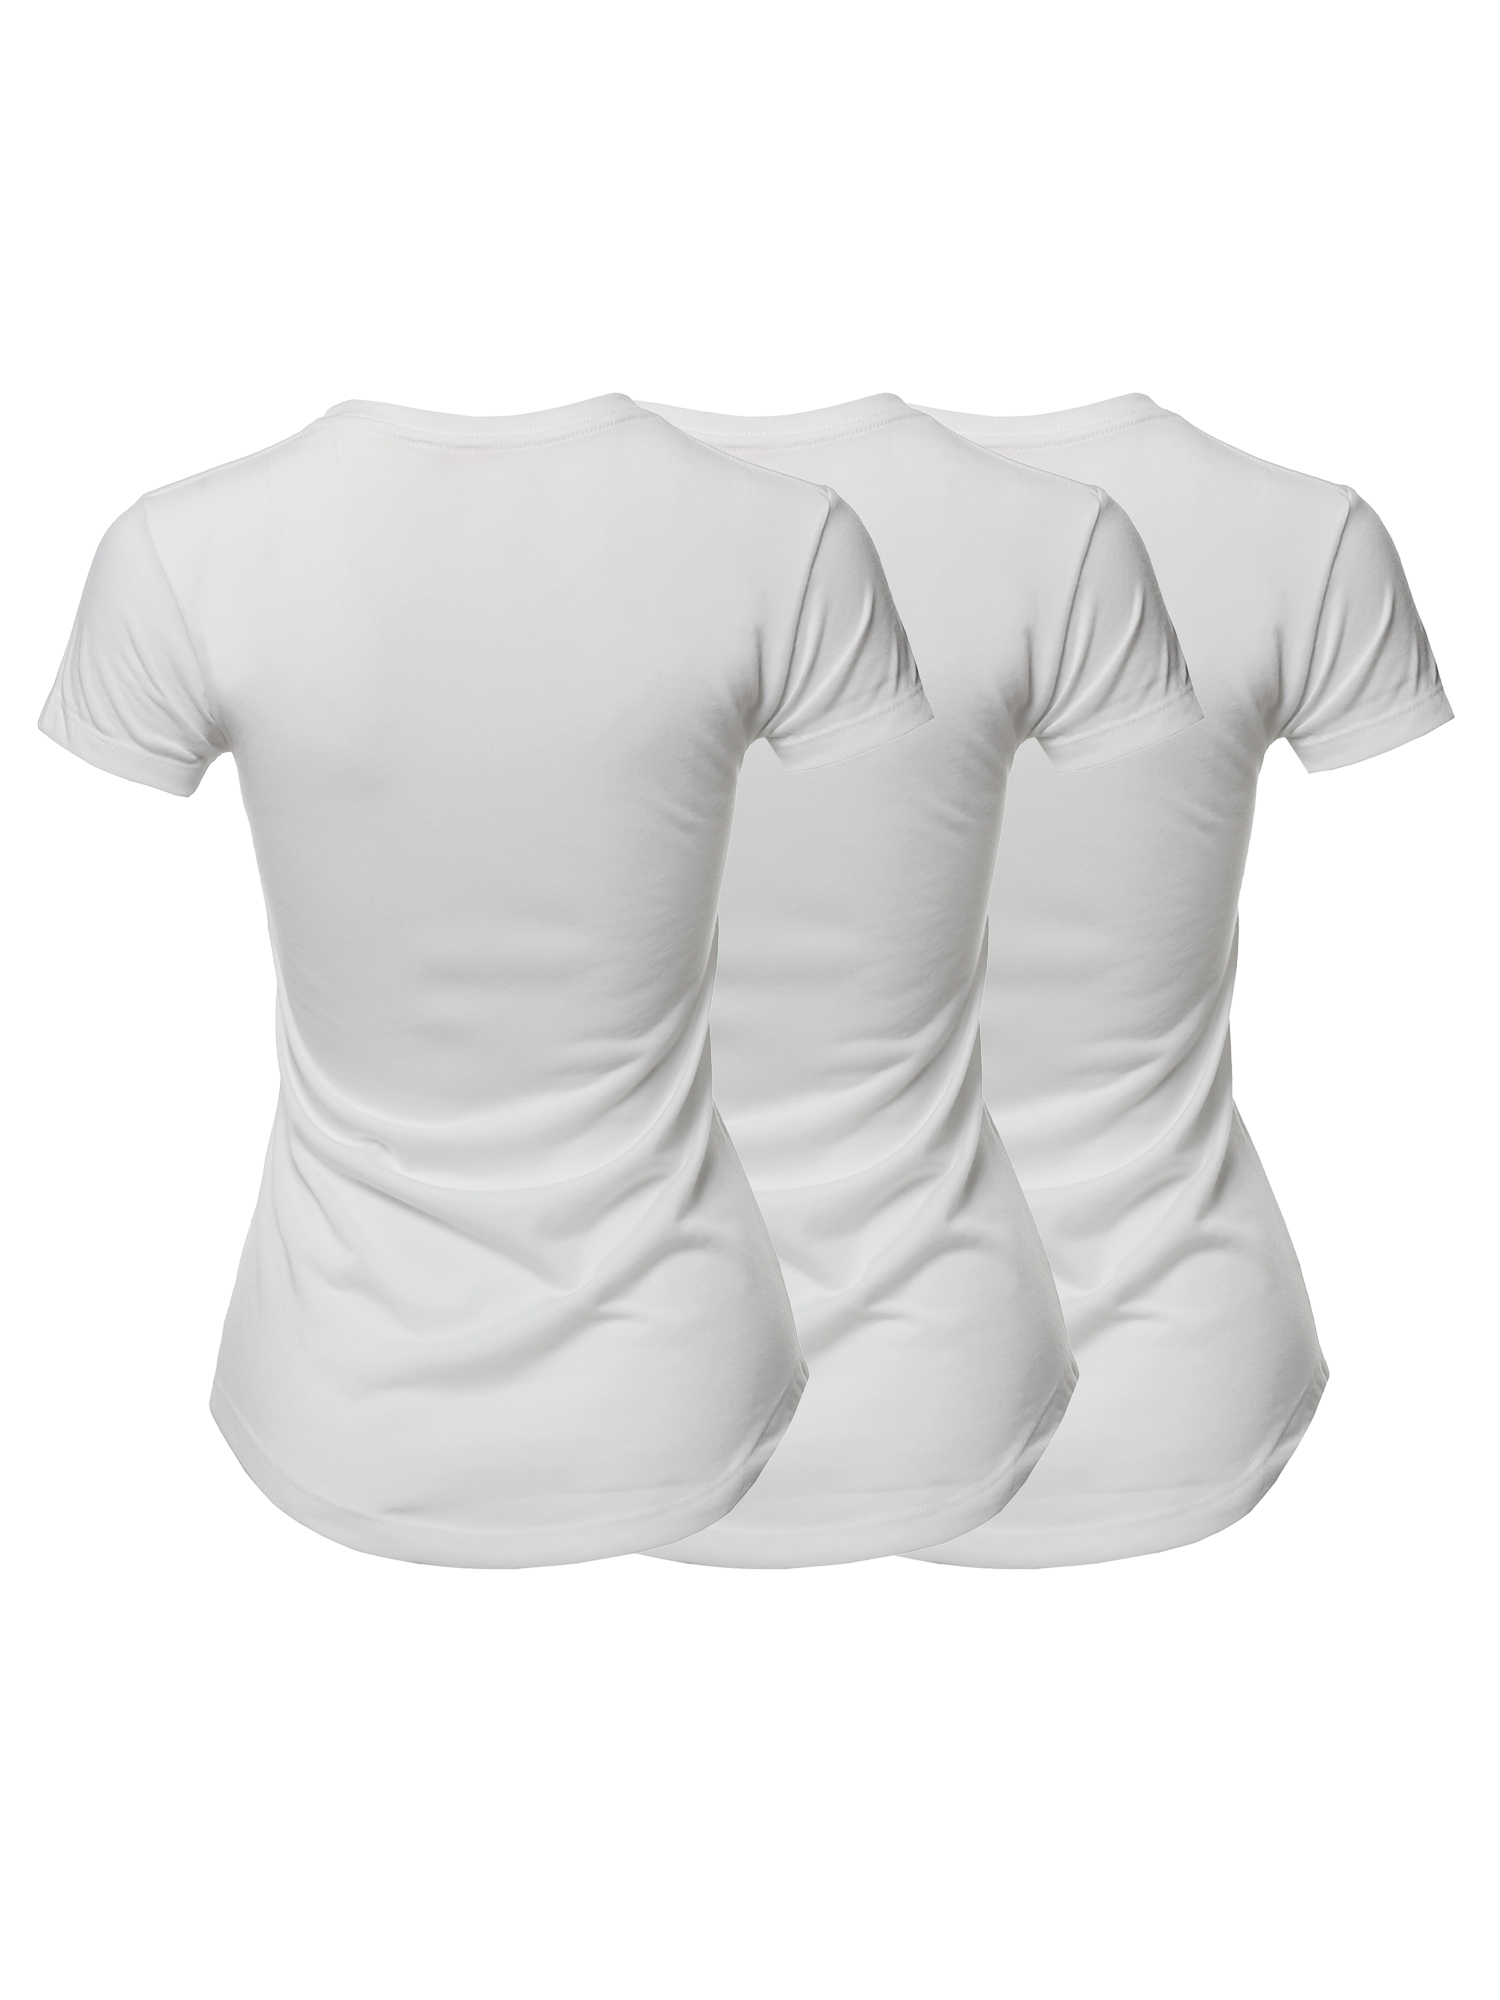 A2Y Women's Basic Solid Premium Short Sleeve Crew Neck Scoop Bottom T Shirt Tee Tops 3-Pack 3 Pack - White S - image 2 of 4